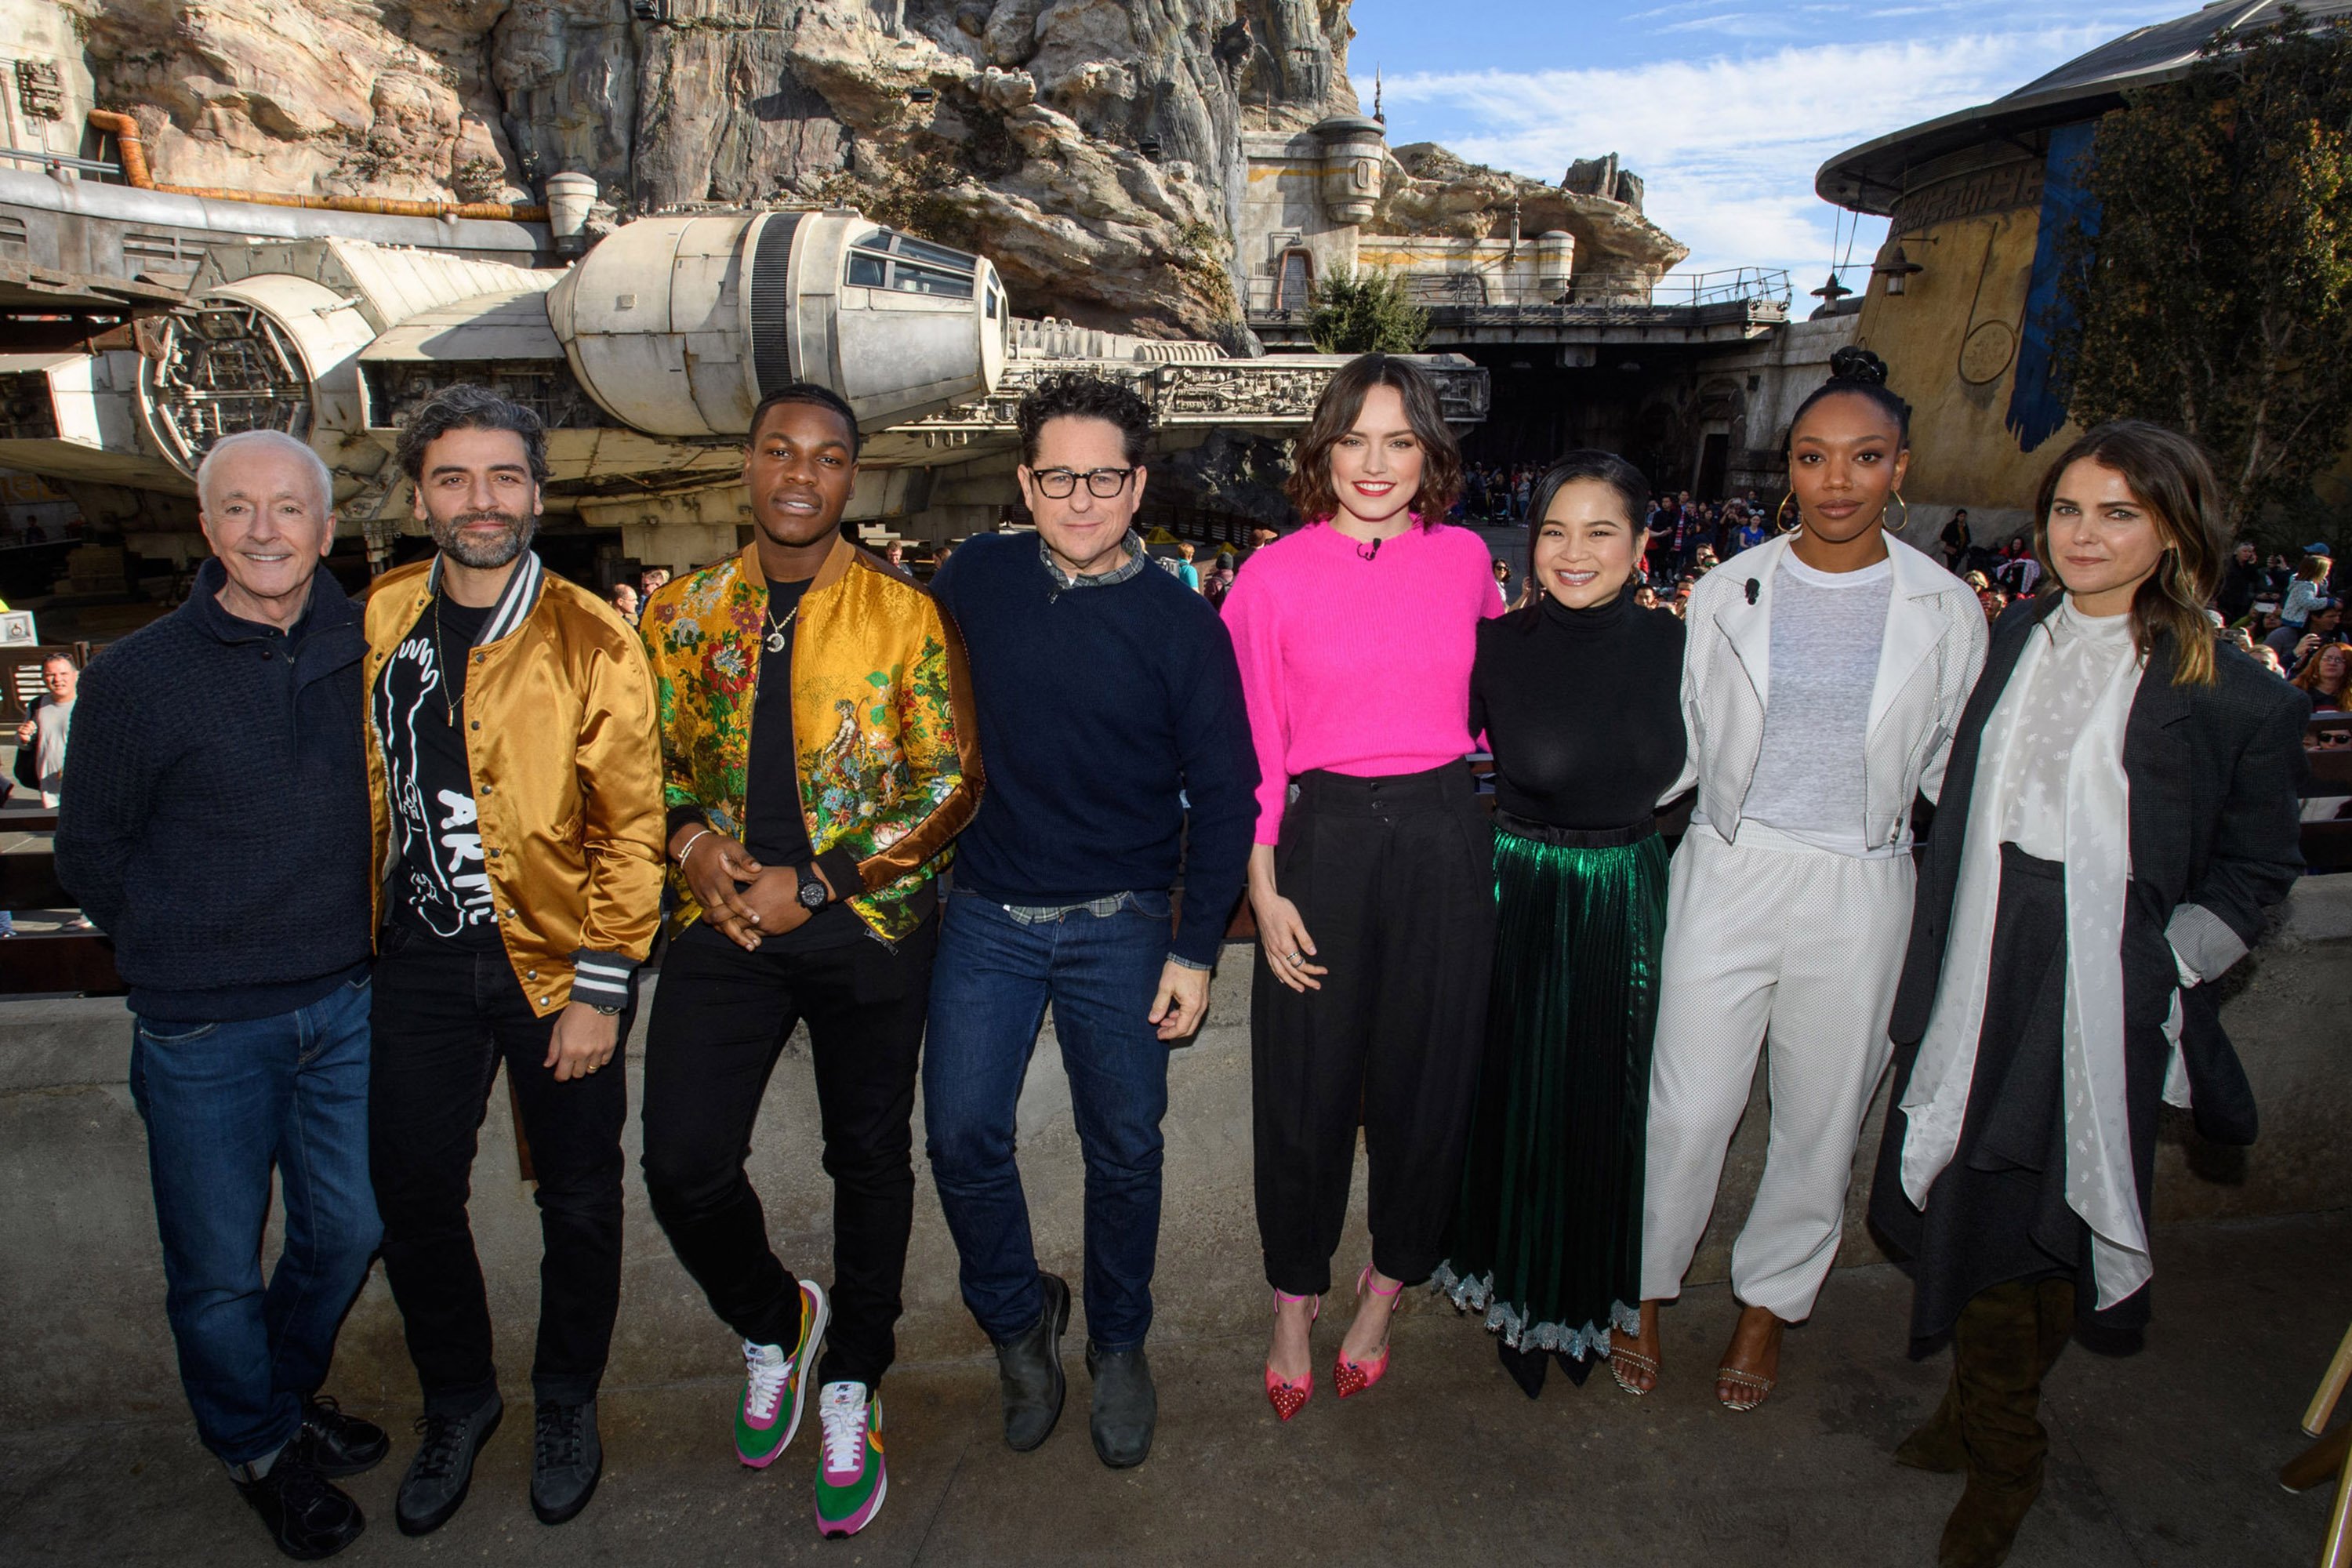 The cast of the film, 'Star Wars: The Rise of Skywalker'